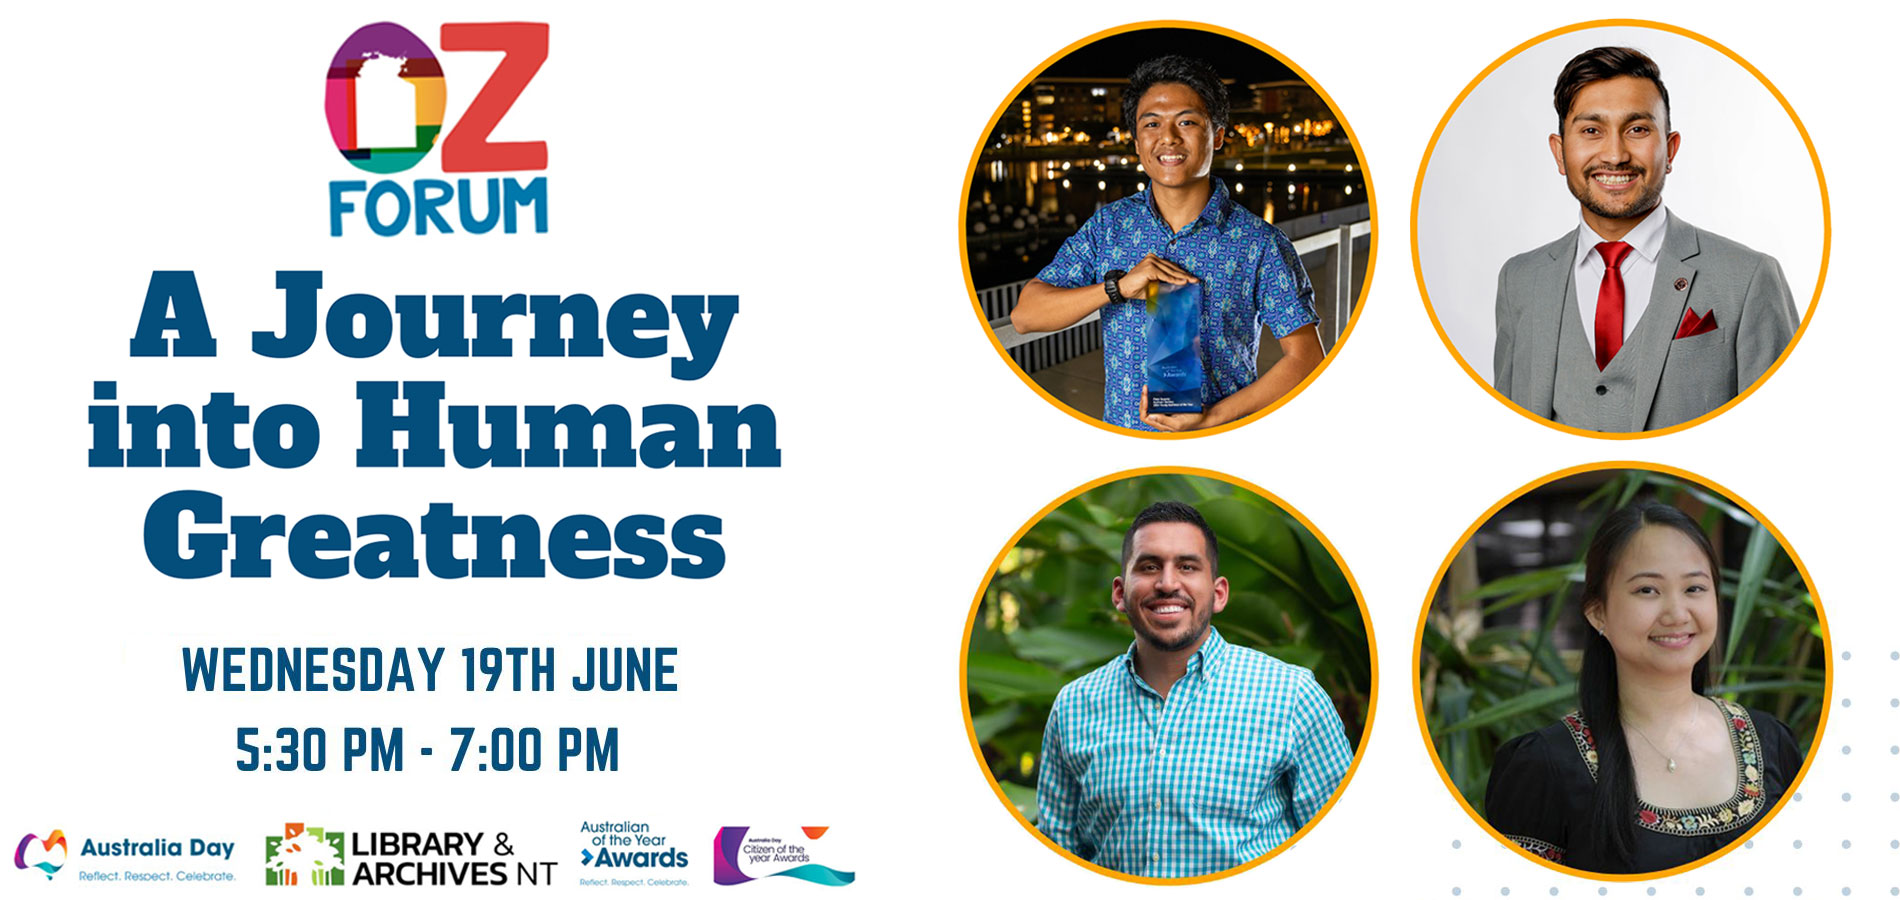 Oz Forum: A Journey into Human Greatness